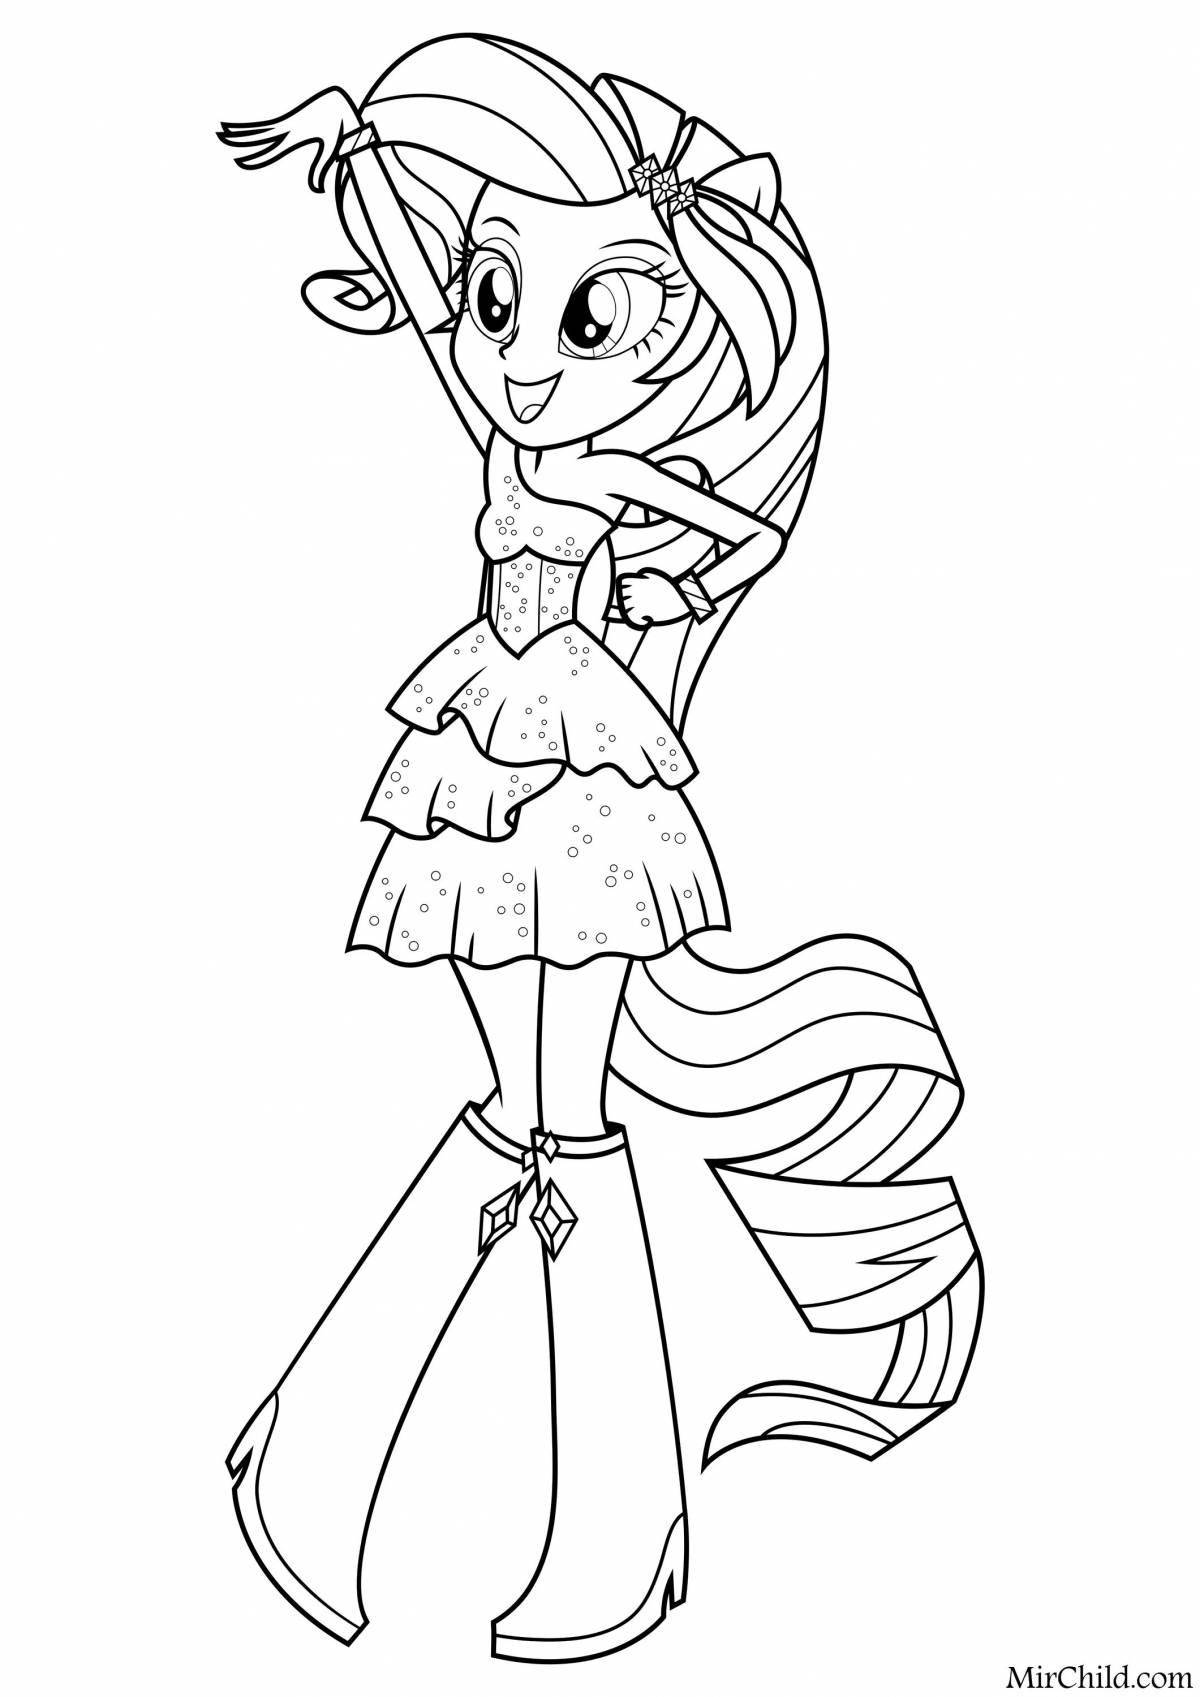 Colourful my little pony girls coloring pages for kids